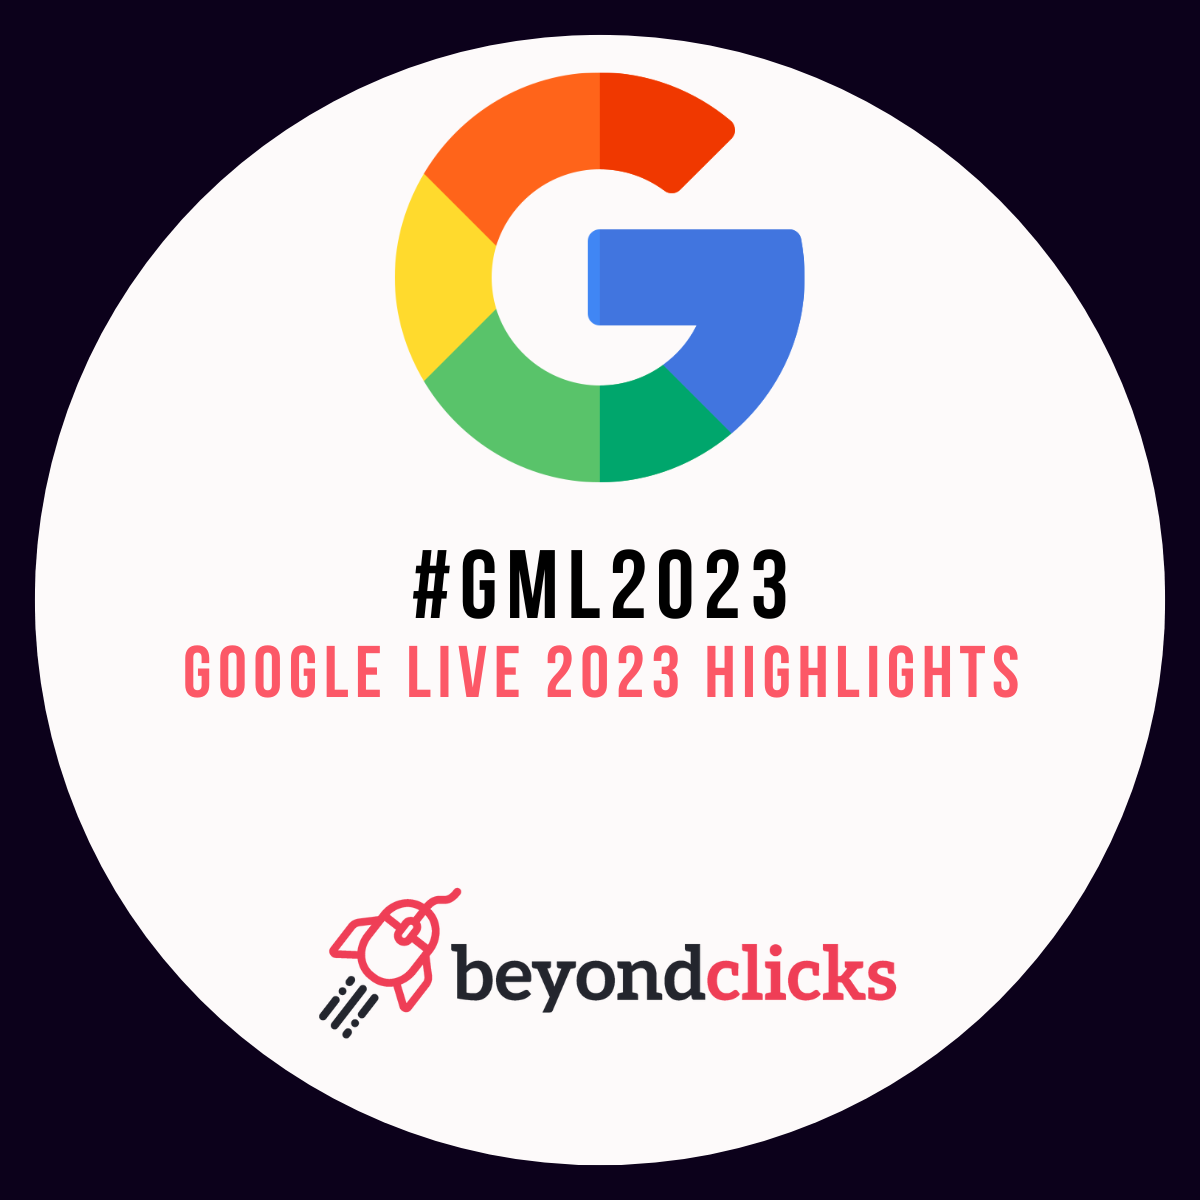 Google Marketing Live 2023 Announcements. Find Out More